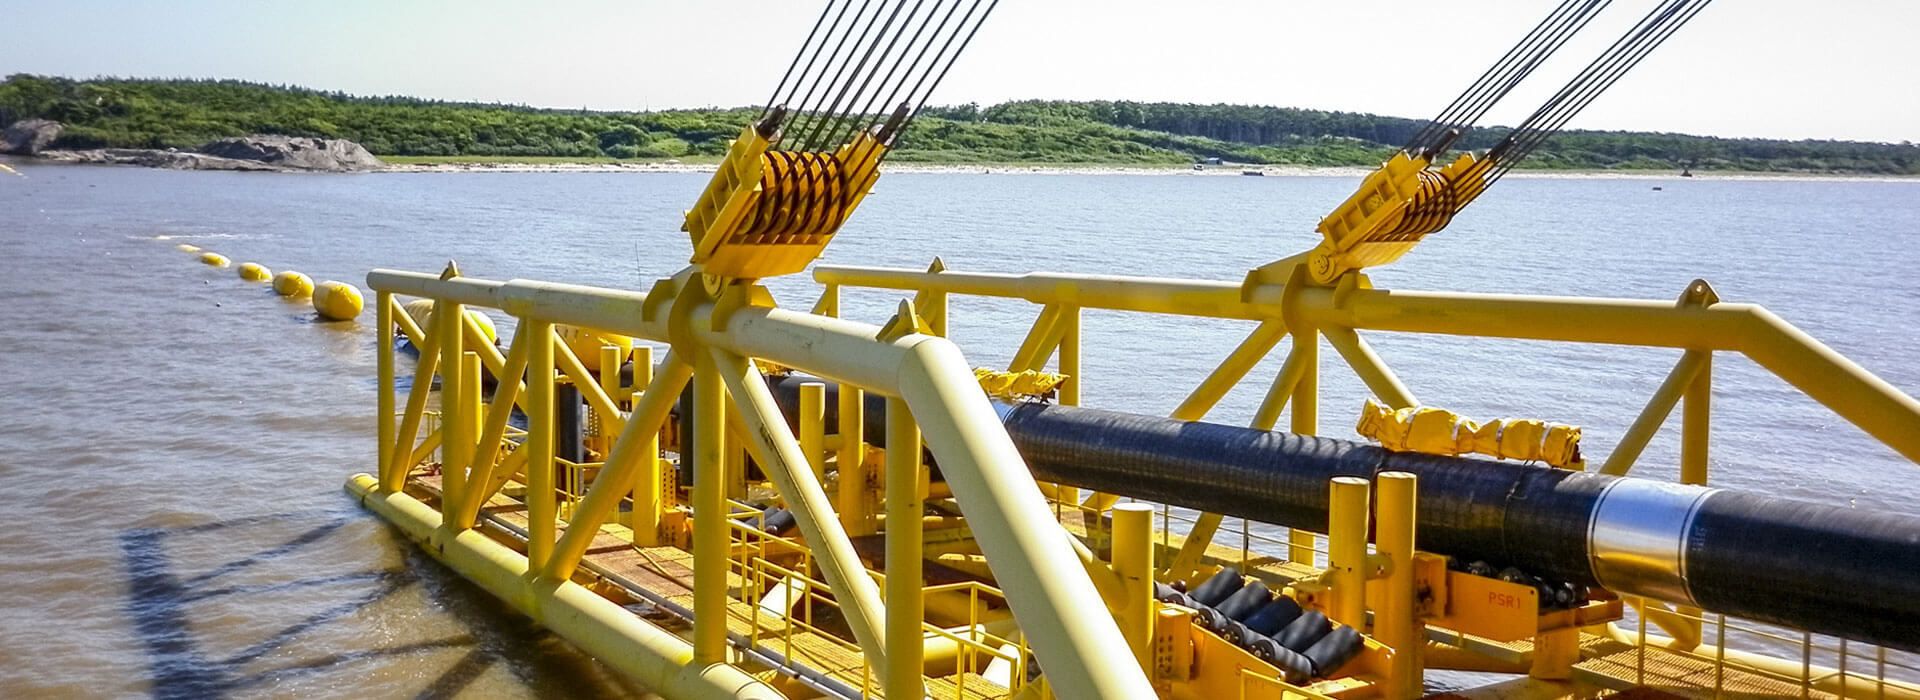 GAZ-SYSTEM has selected next companies to supervise construction of Baltic Pipe offshore part - MarinePoland.com